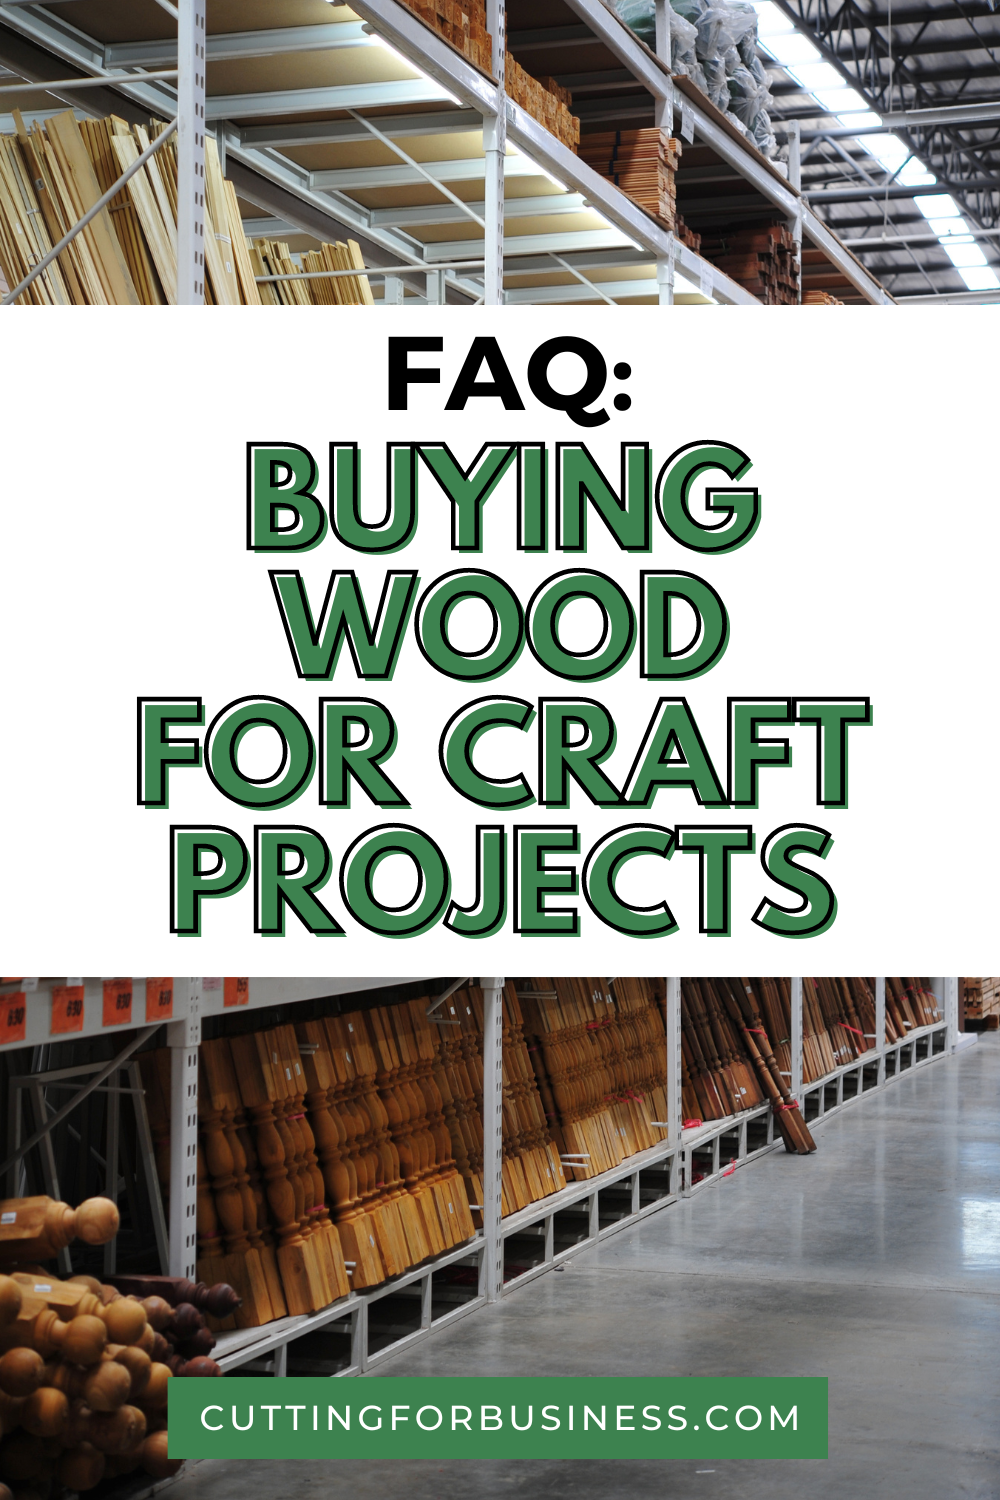 FAQ: Buying Wood for Craft Projects - cuttingforbusiness.com